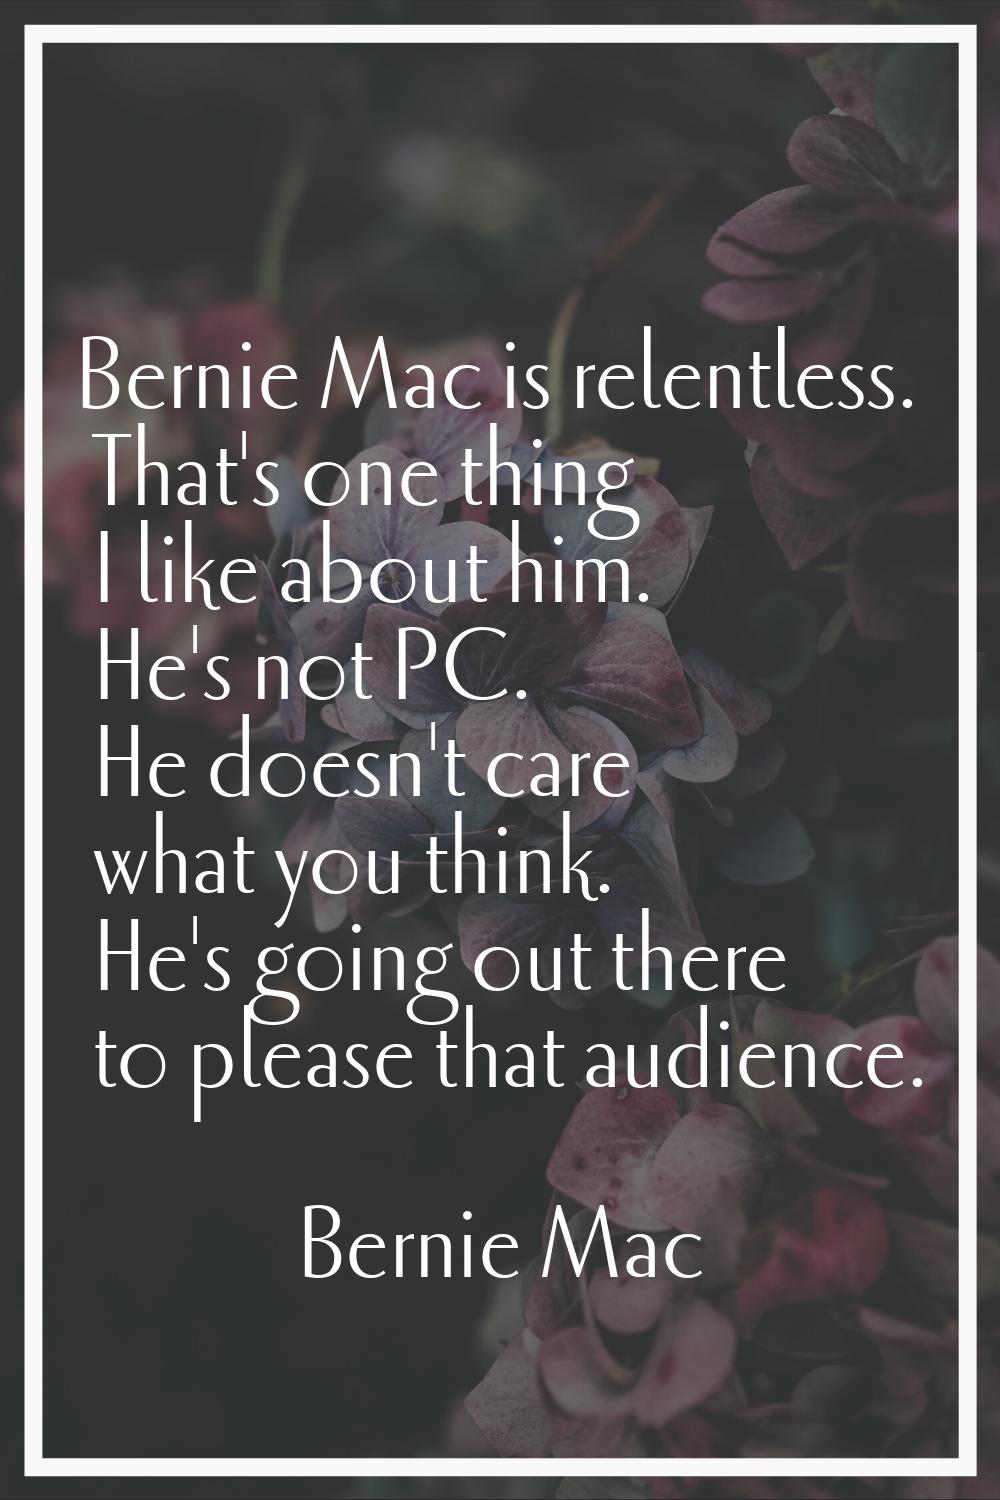 Bernie Mac is relentless. That's one thing I like about him. He's not PC. He doesn't care what you 